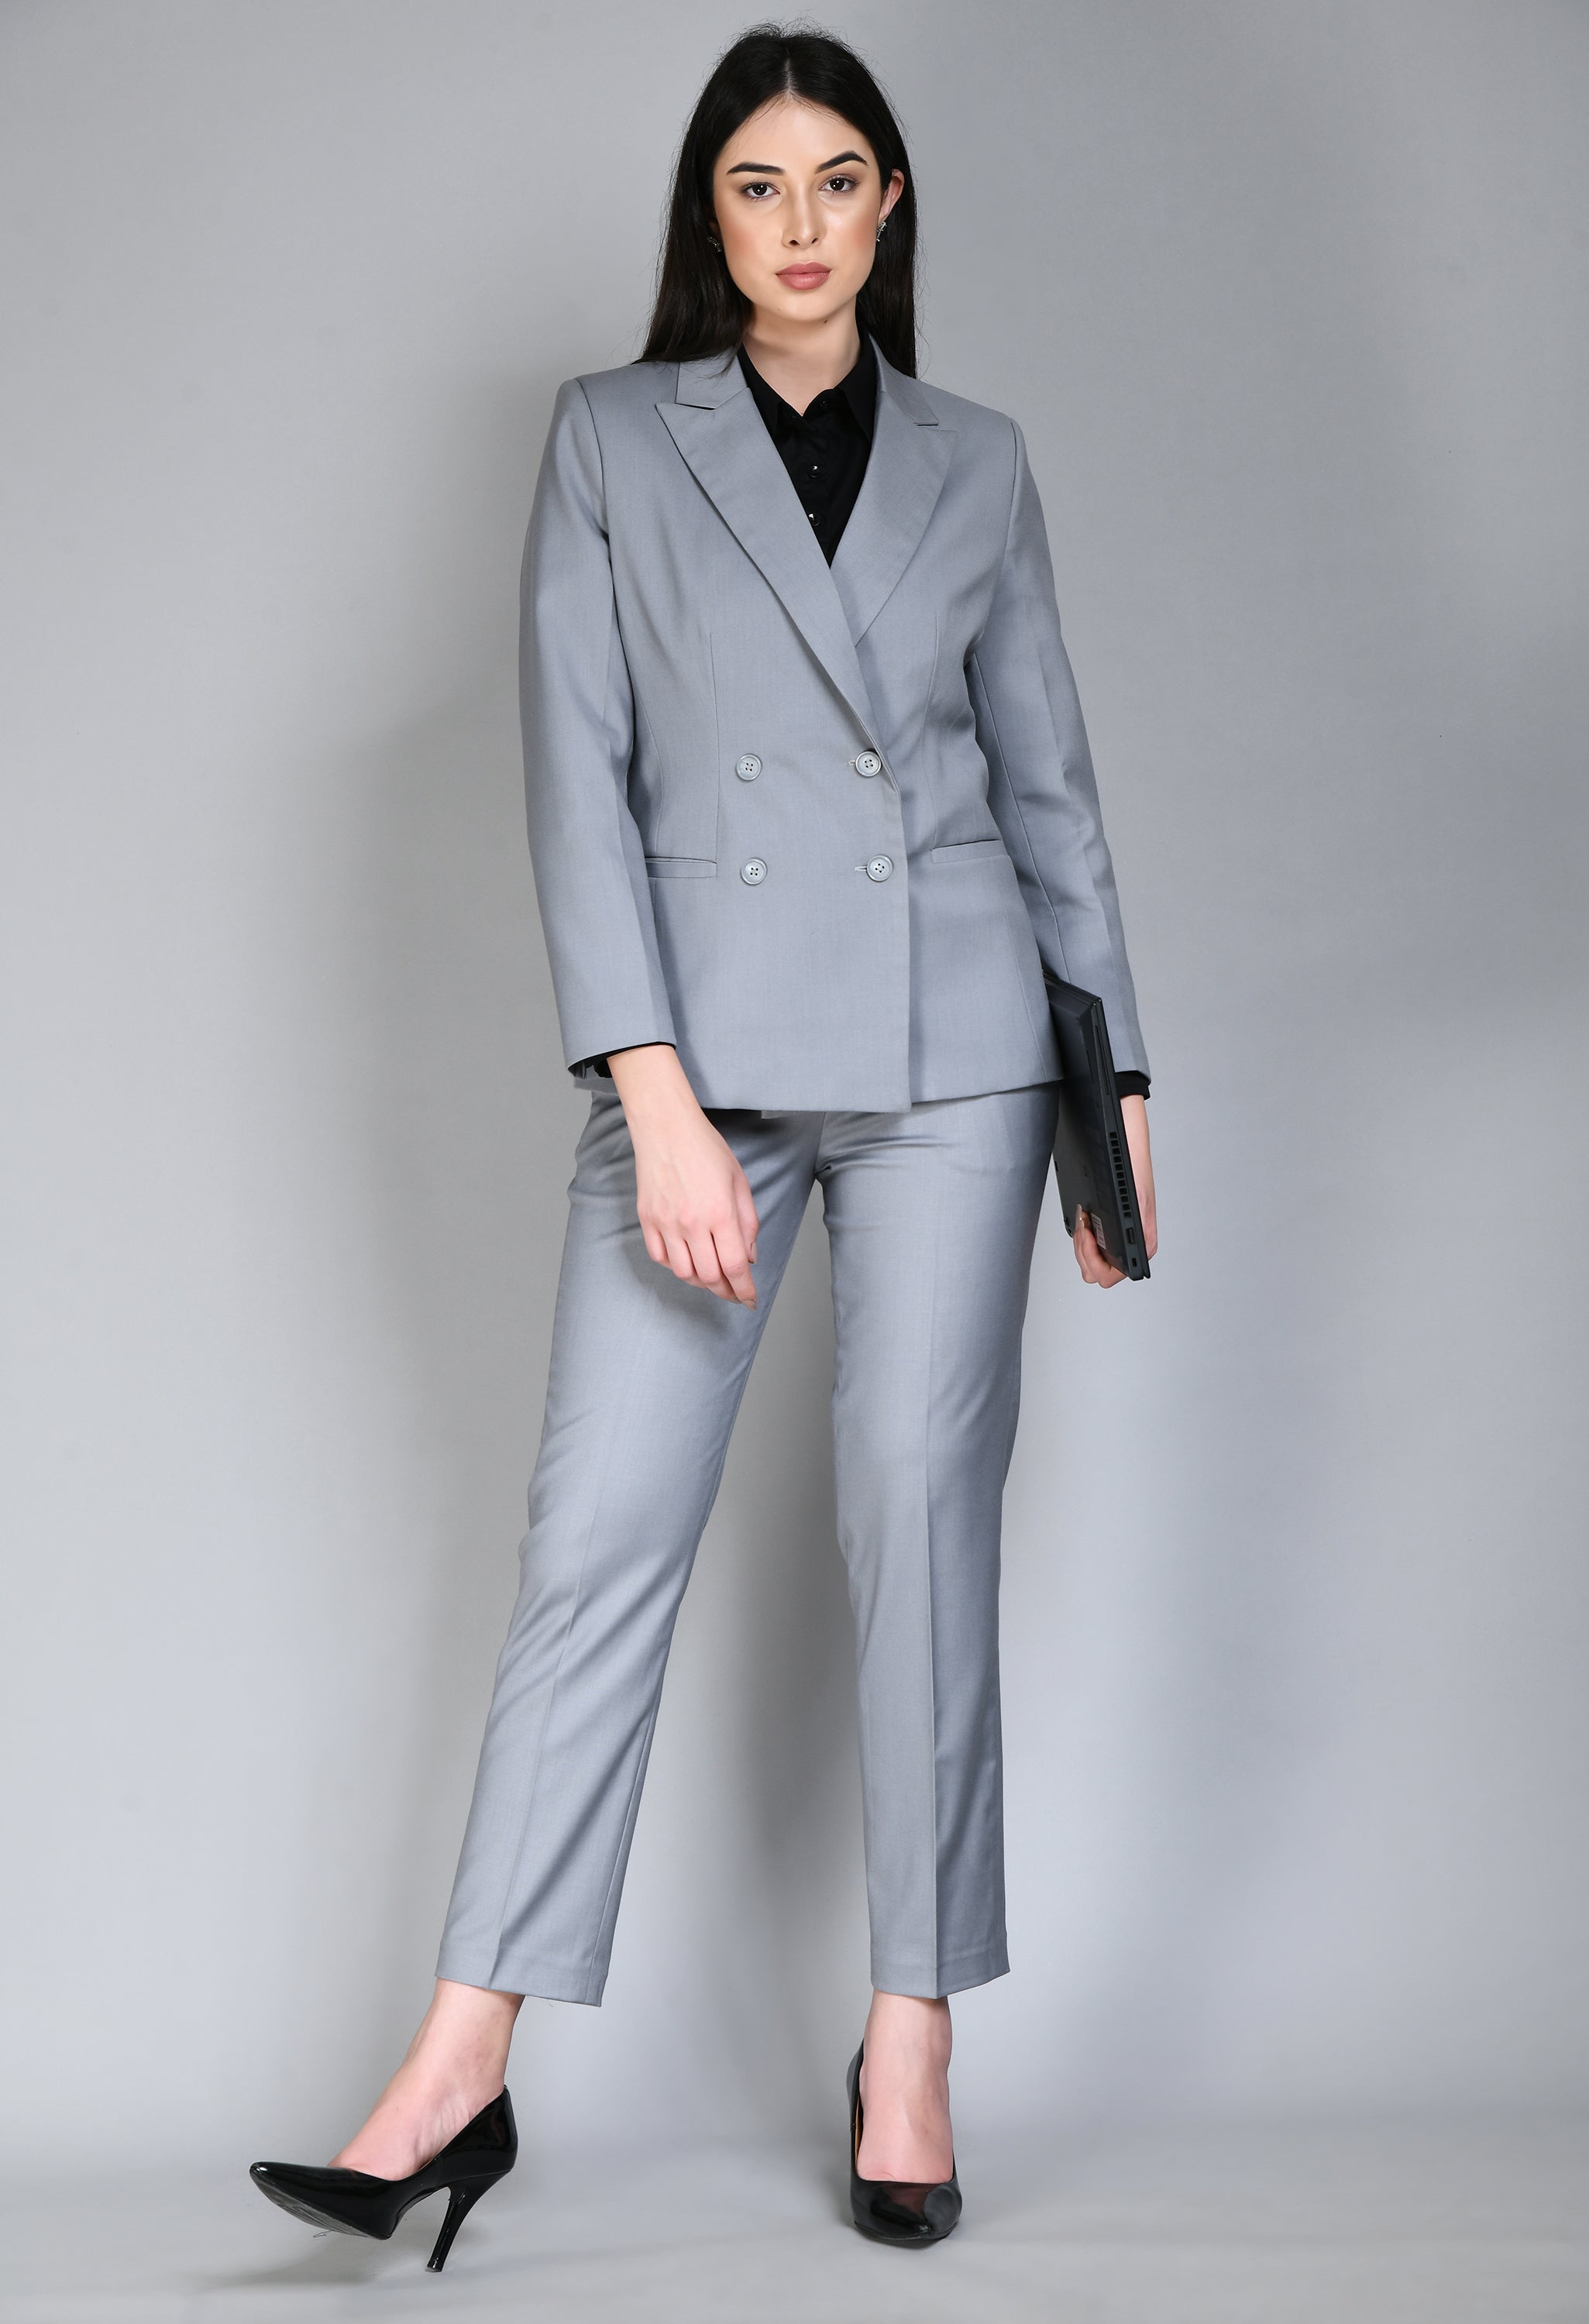 Buy Women's 2 Pieces Office Lady Blazer Set Formal Business Pant Suit Blazer  Jacket,Pant/Skirt Grey at Amazon.in